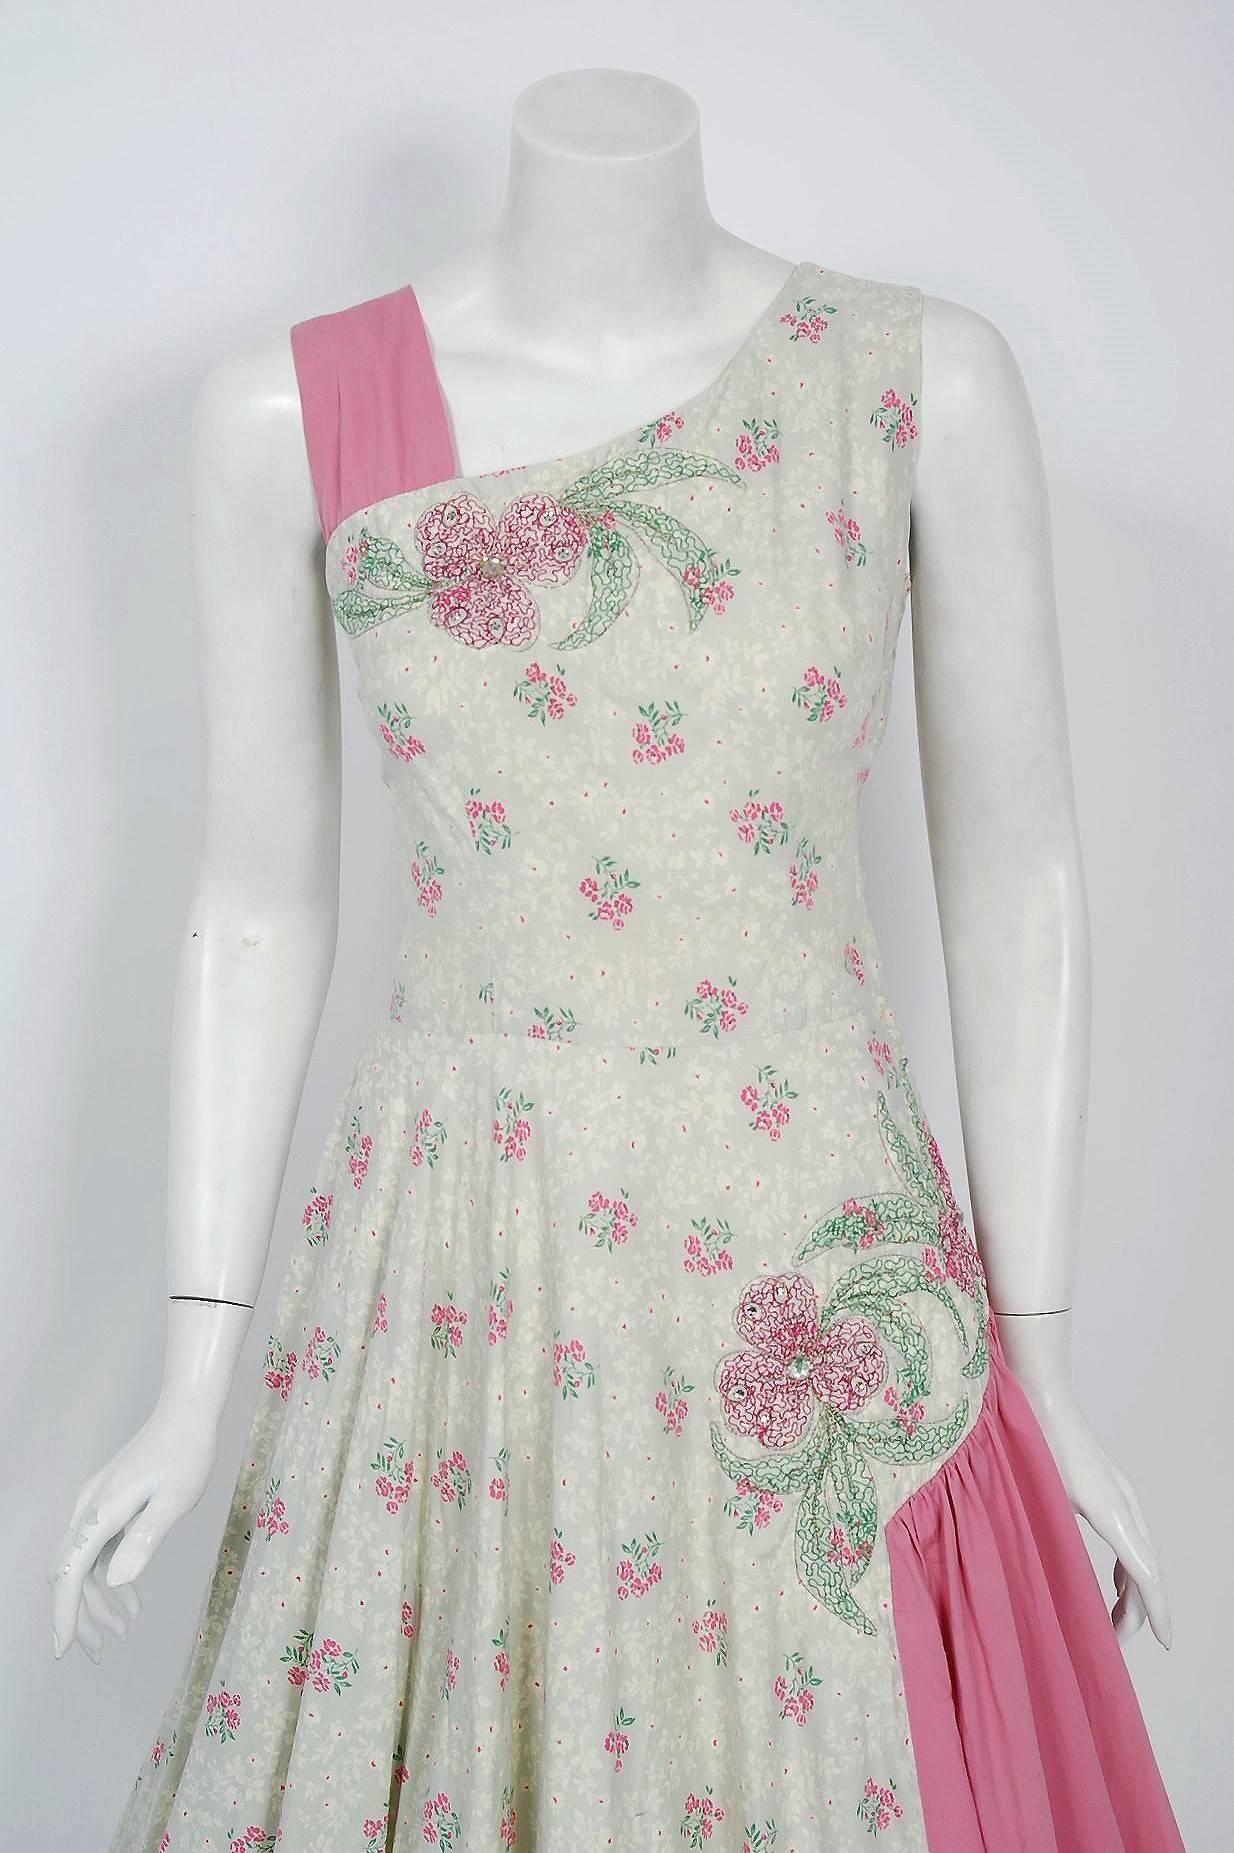 An exceptional and breathtaking 1950's floral cotton sundress by Miami Casuals! The print is an ethereal floral-garden in shades of pink, green, ivory and pale grey. Some of the flowers are actually 3-dimensional; padded from behind and then